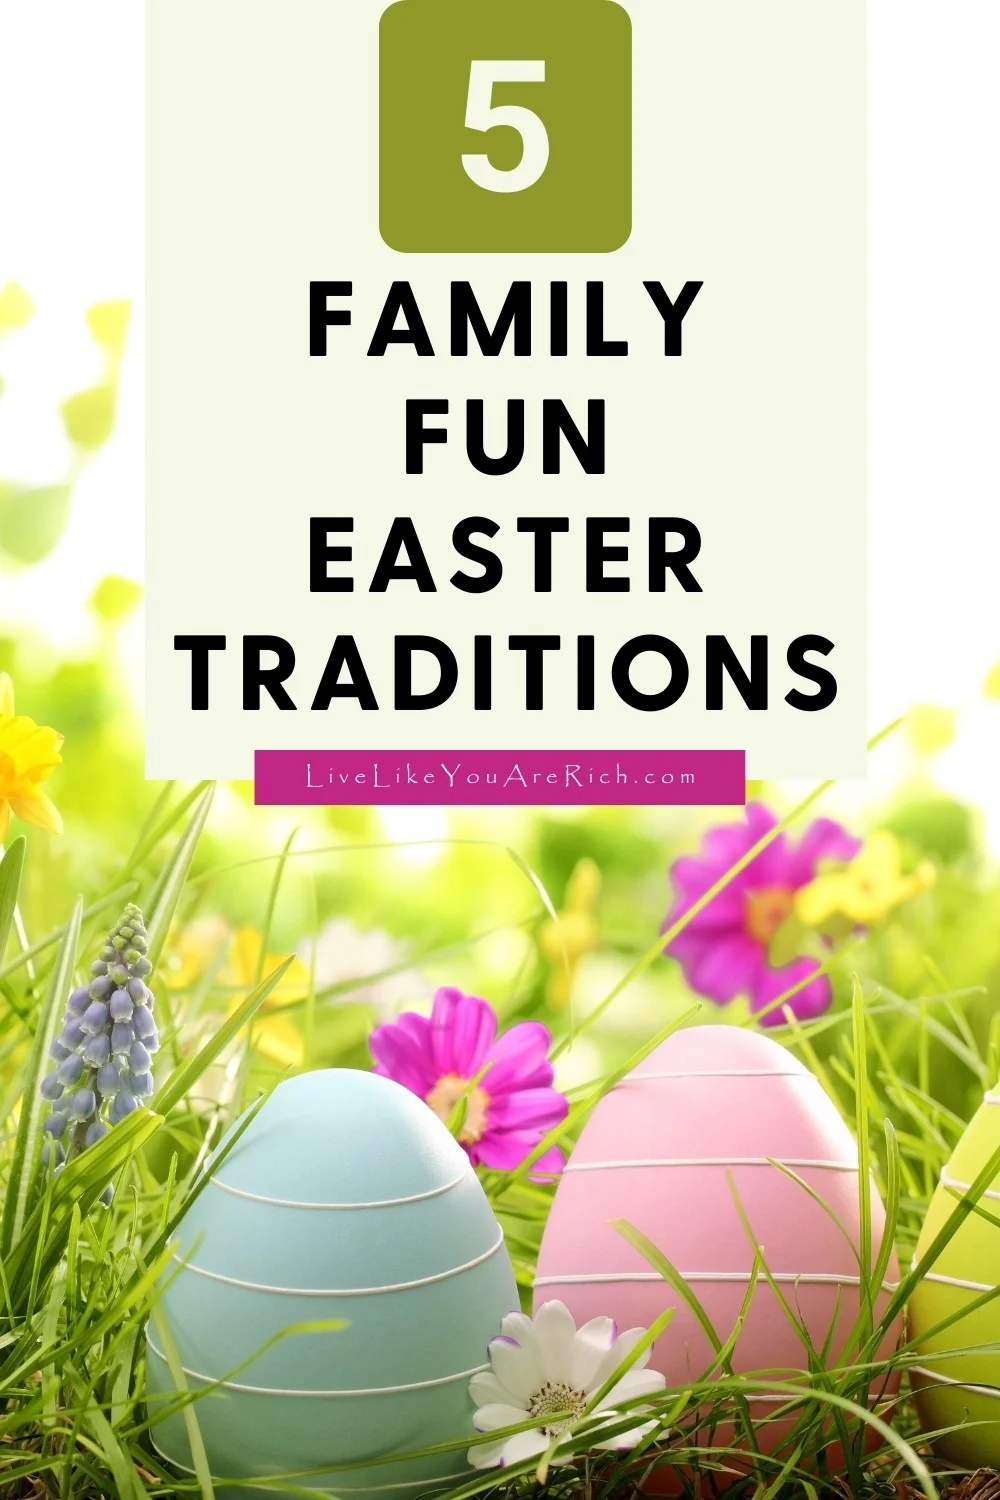 Easter is one of my favorite holidays. We always get together as a family and celebrate. Here are 5 Family Fun Easter traditions that I adore!